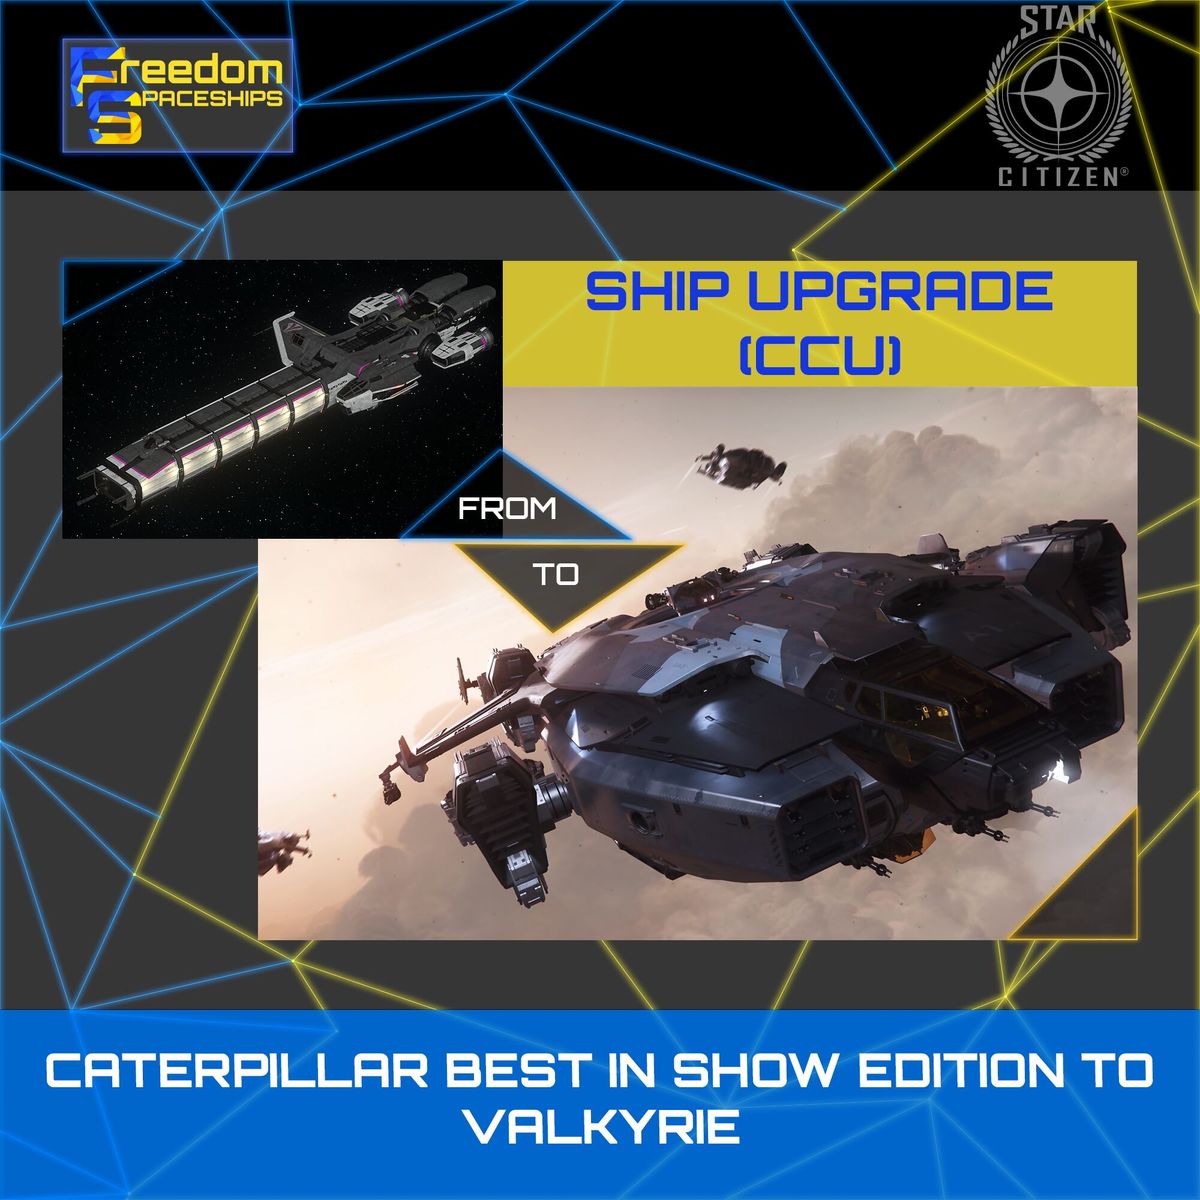 Upgrade - Caterpillar Best In Show Edition to Valkyrie